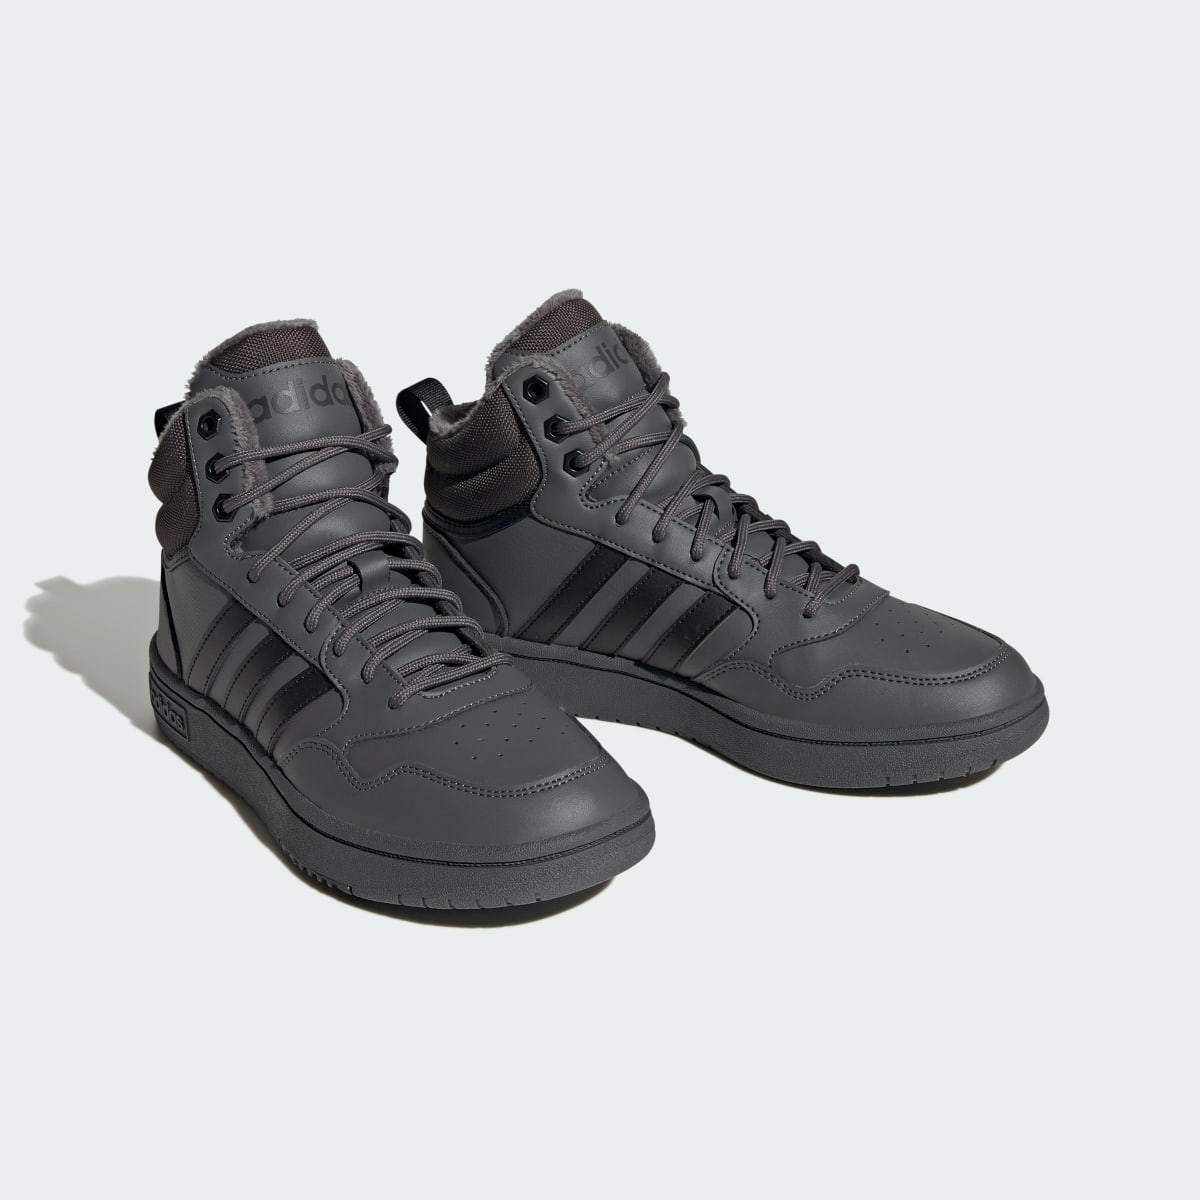 Adidas Hoops 3.0 Mid Lifestyle Basketball Classic Fur Lining Winterized Schuh. 5